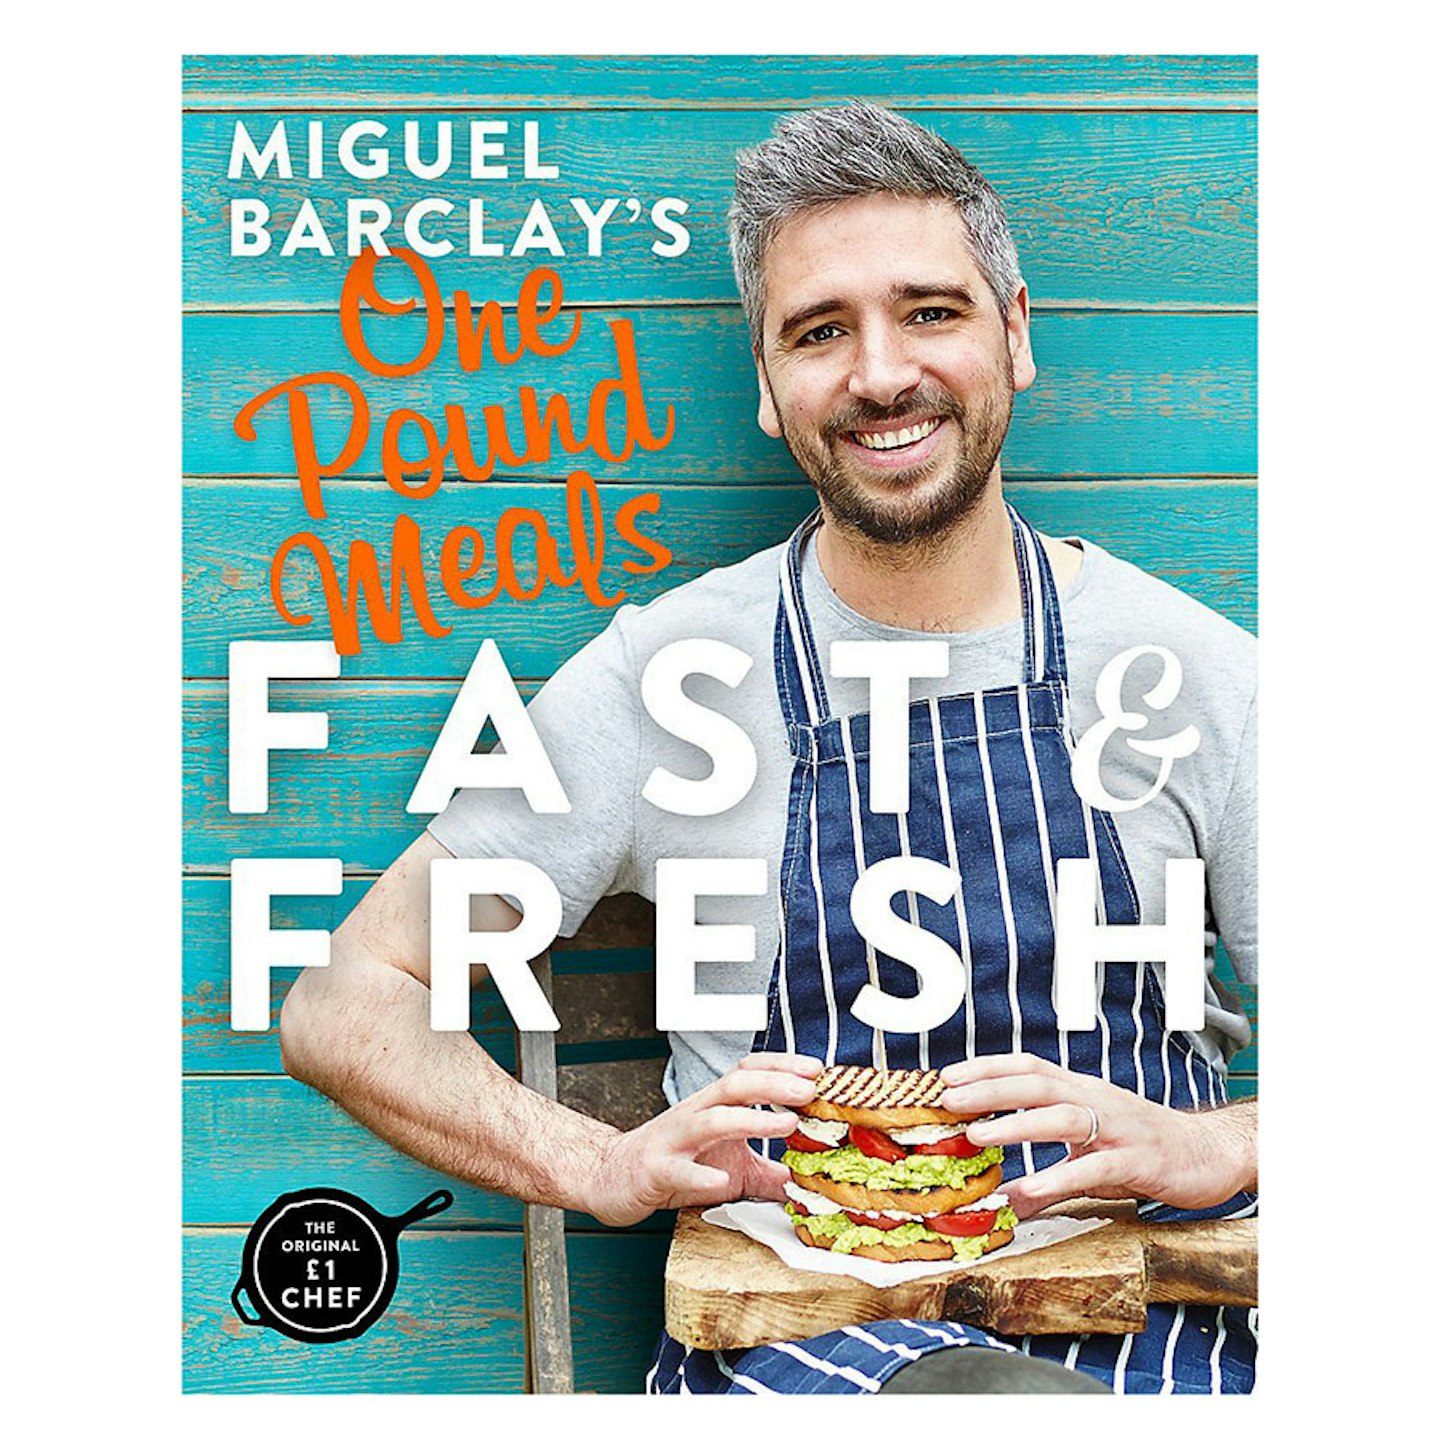 Miguel Barclayu2019s One Pound Meals Fast and Fresh, £7.99